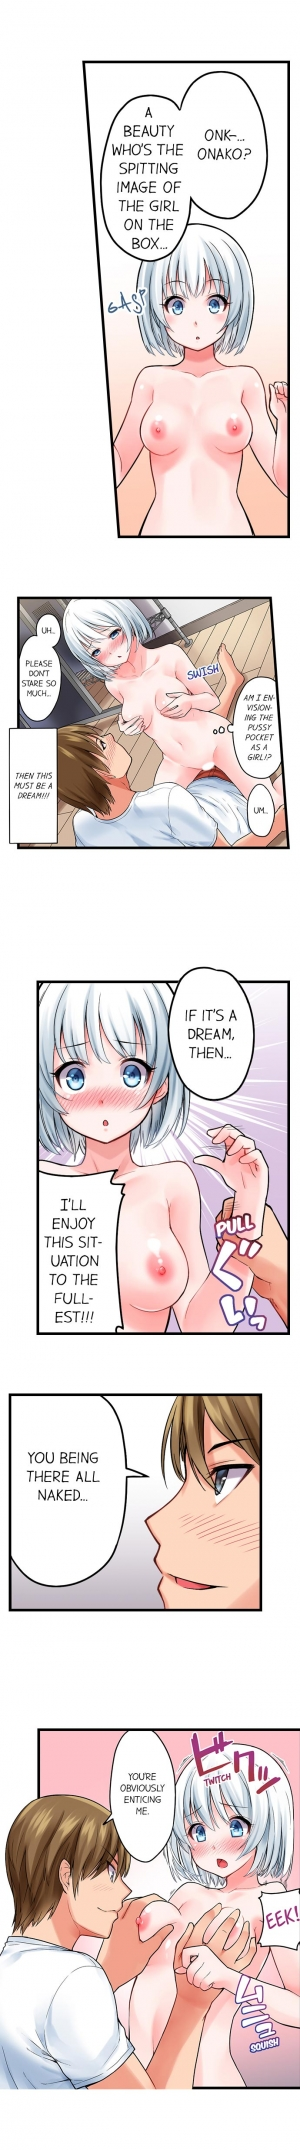 [Kintarou] The Descent to Earth of The Great Pussy Virgin Ch. 1-6 (Ongoing) [English] - Page 9